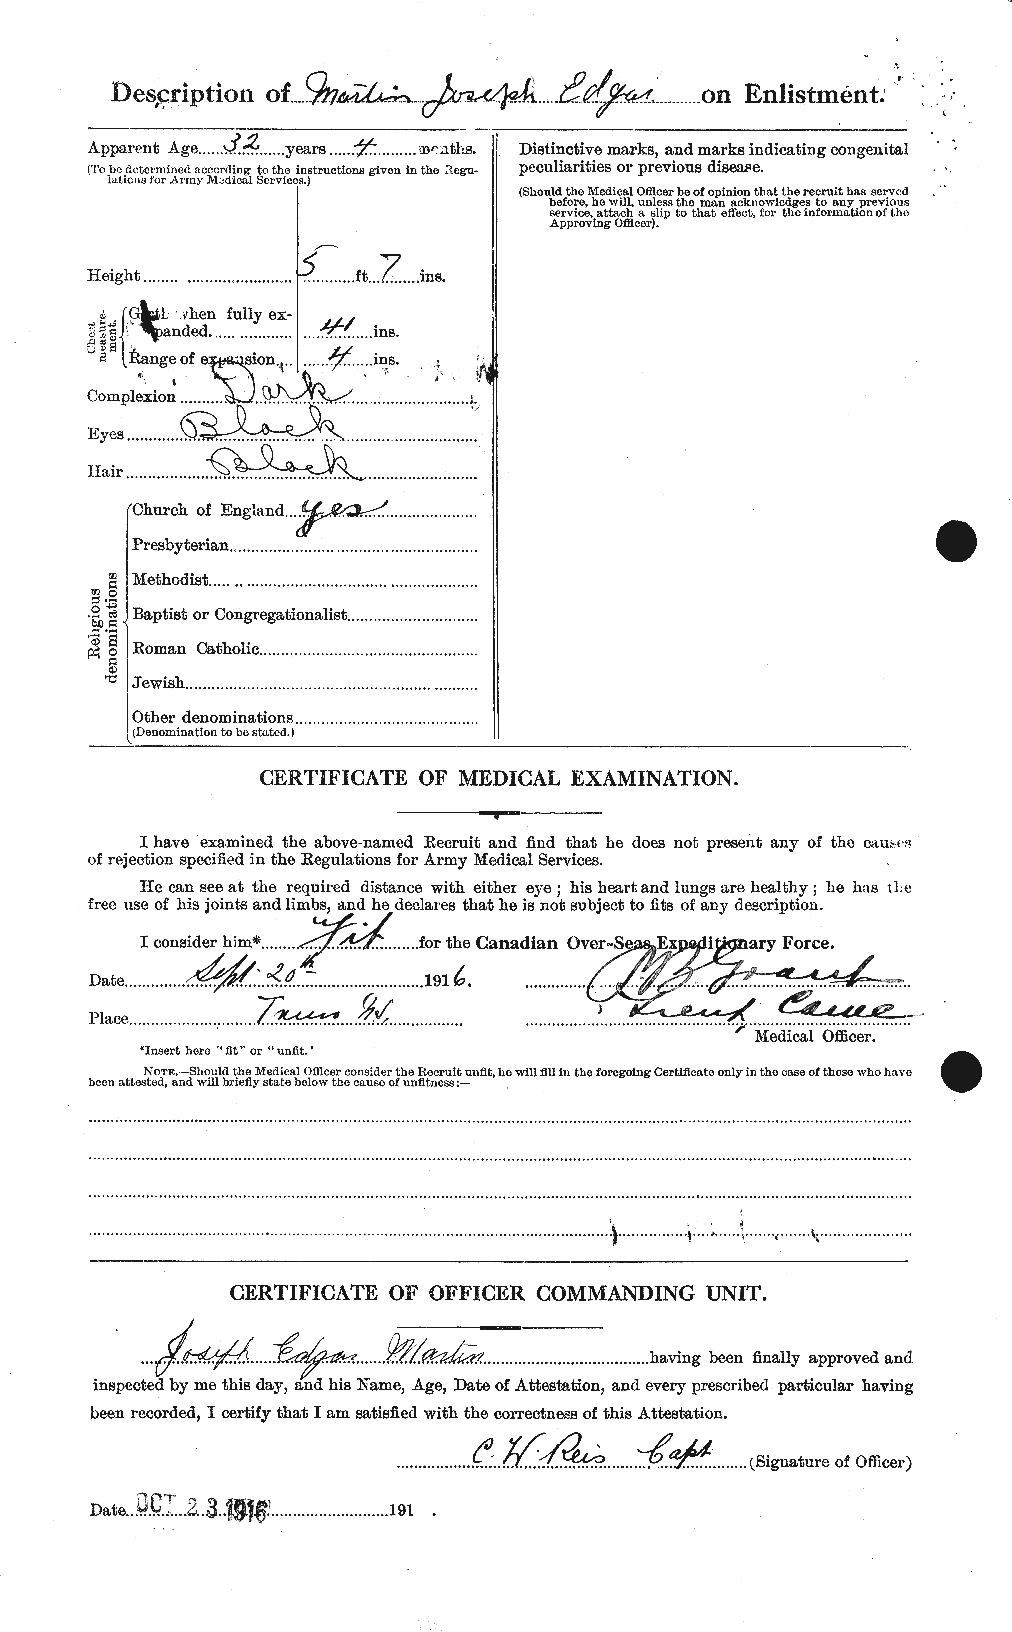 Personnel Records of the First World War - CEF 481065b